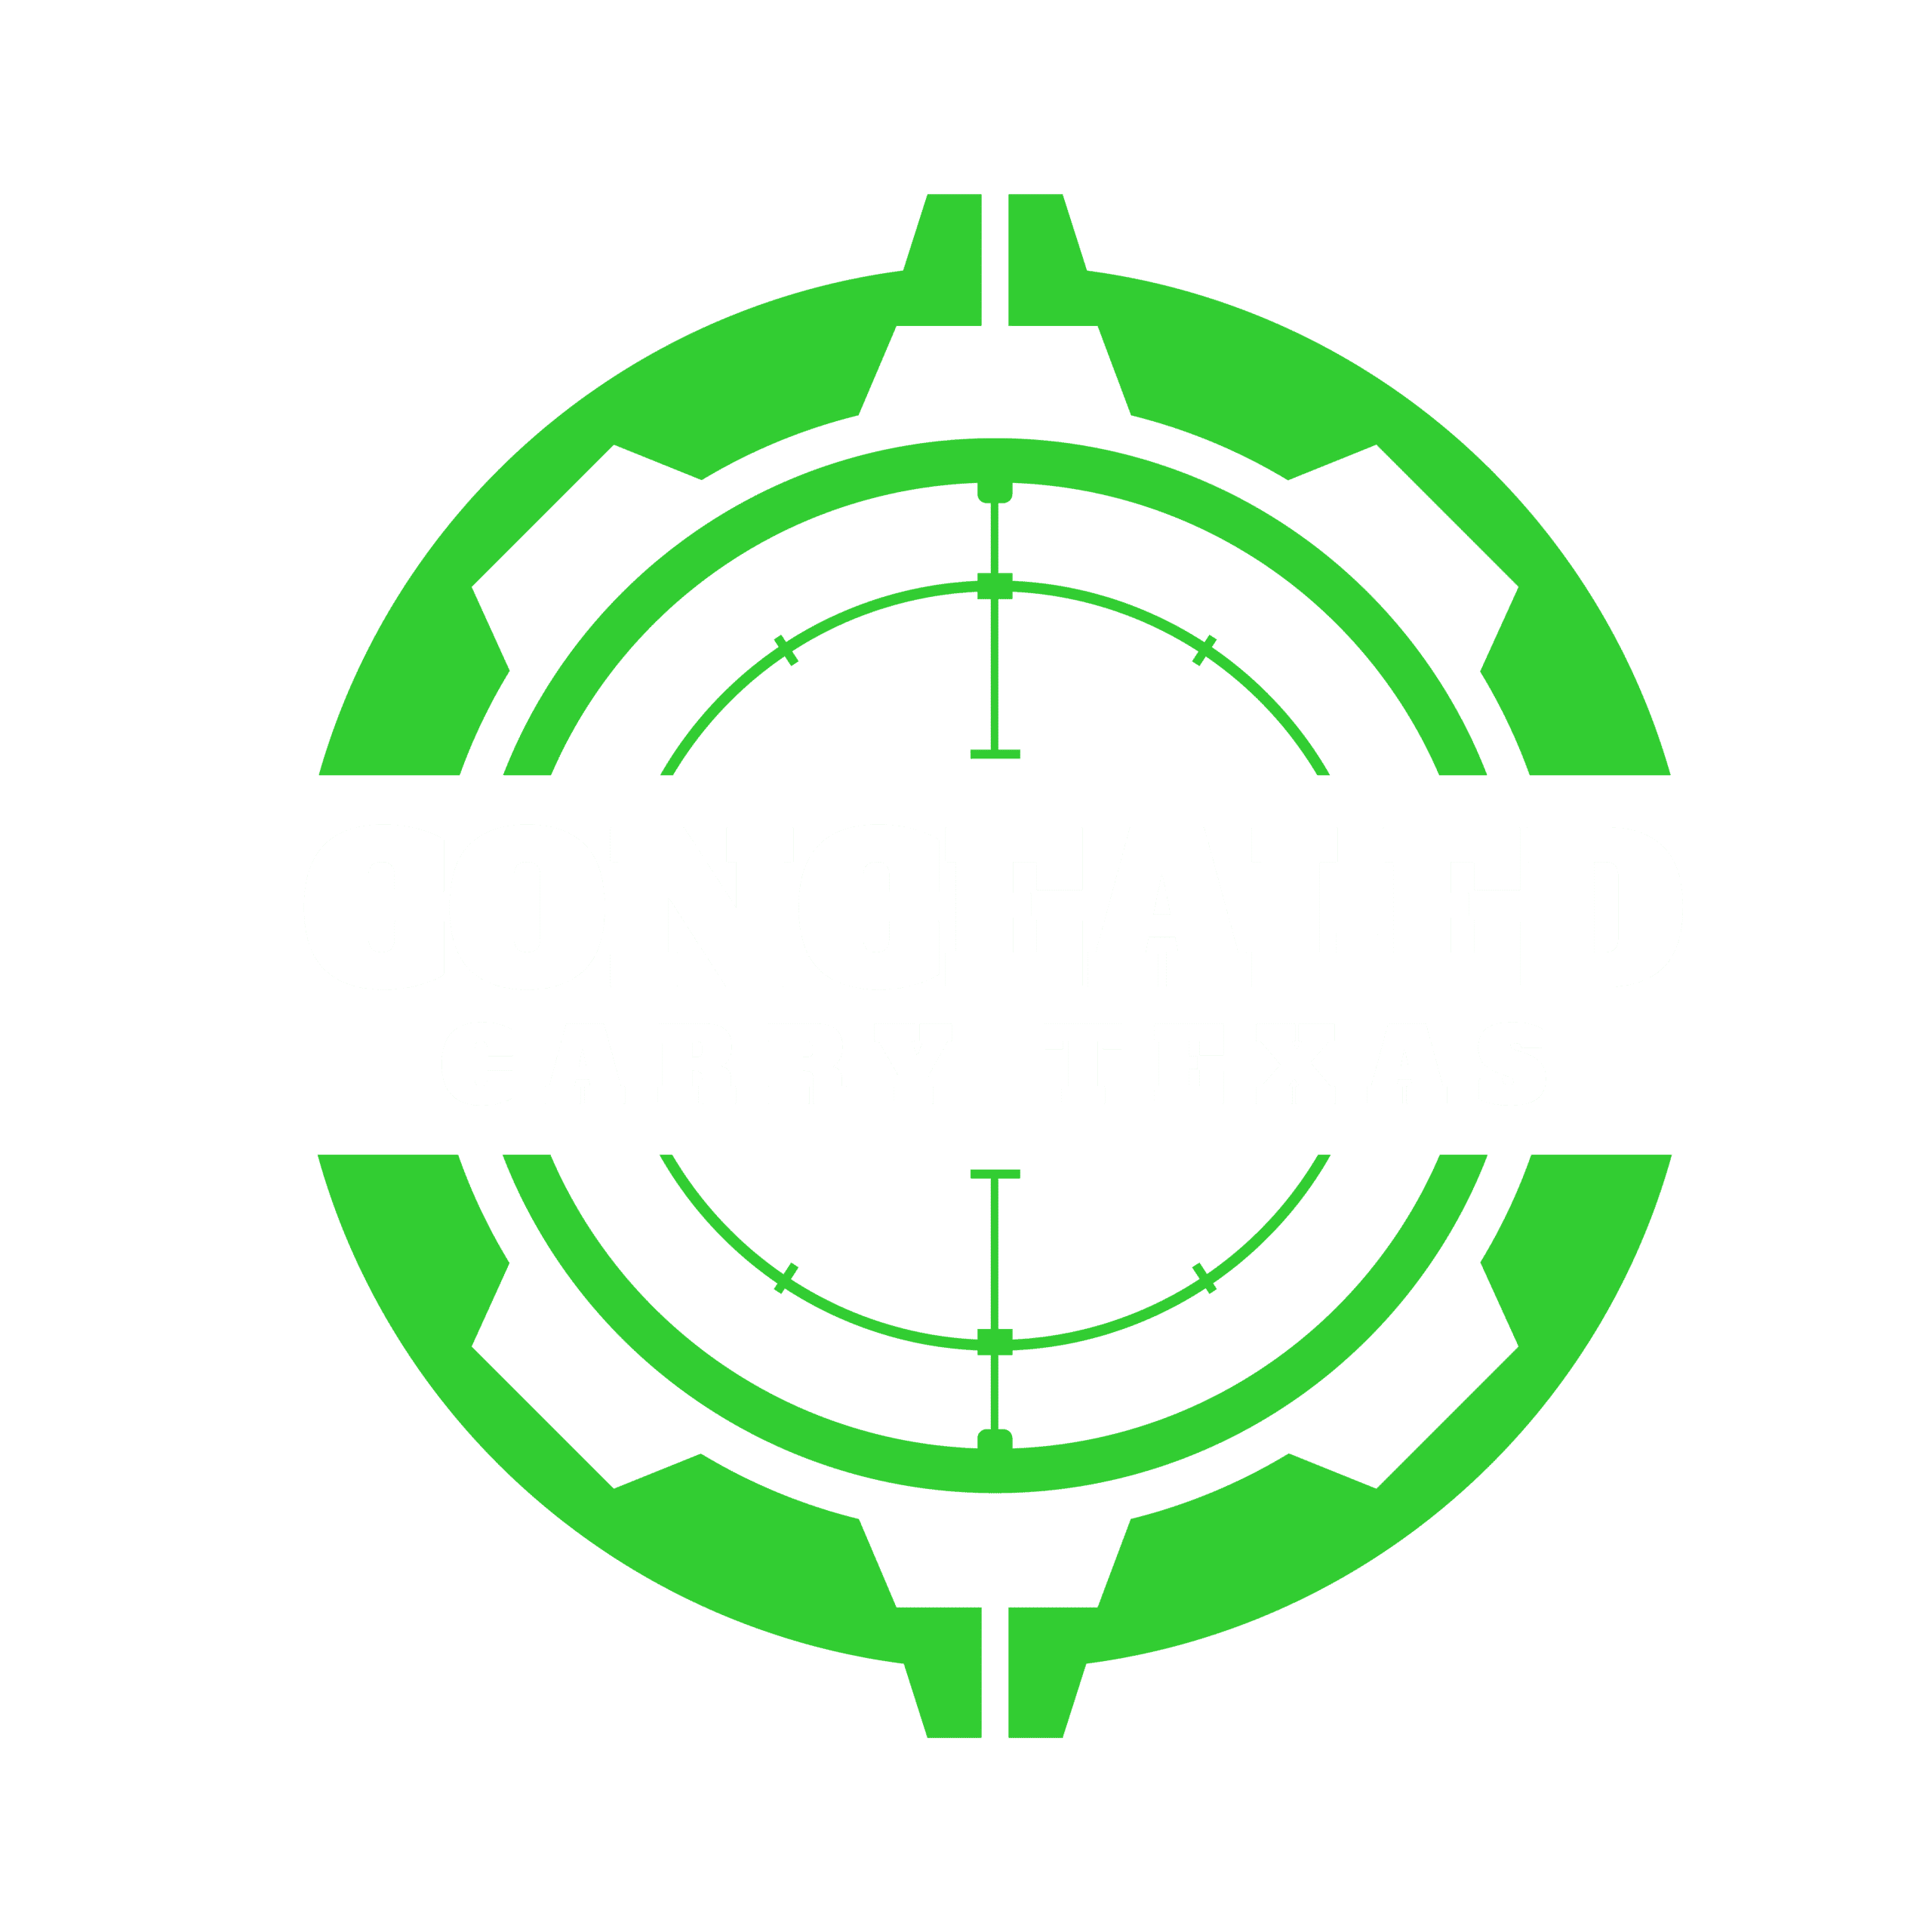 Texas Concealed Carry License Logo